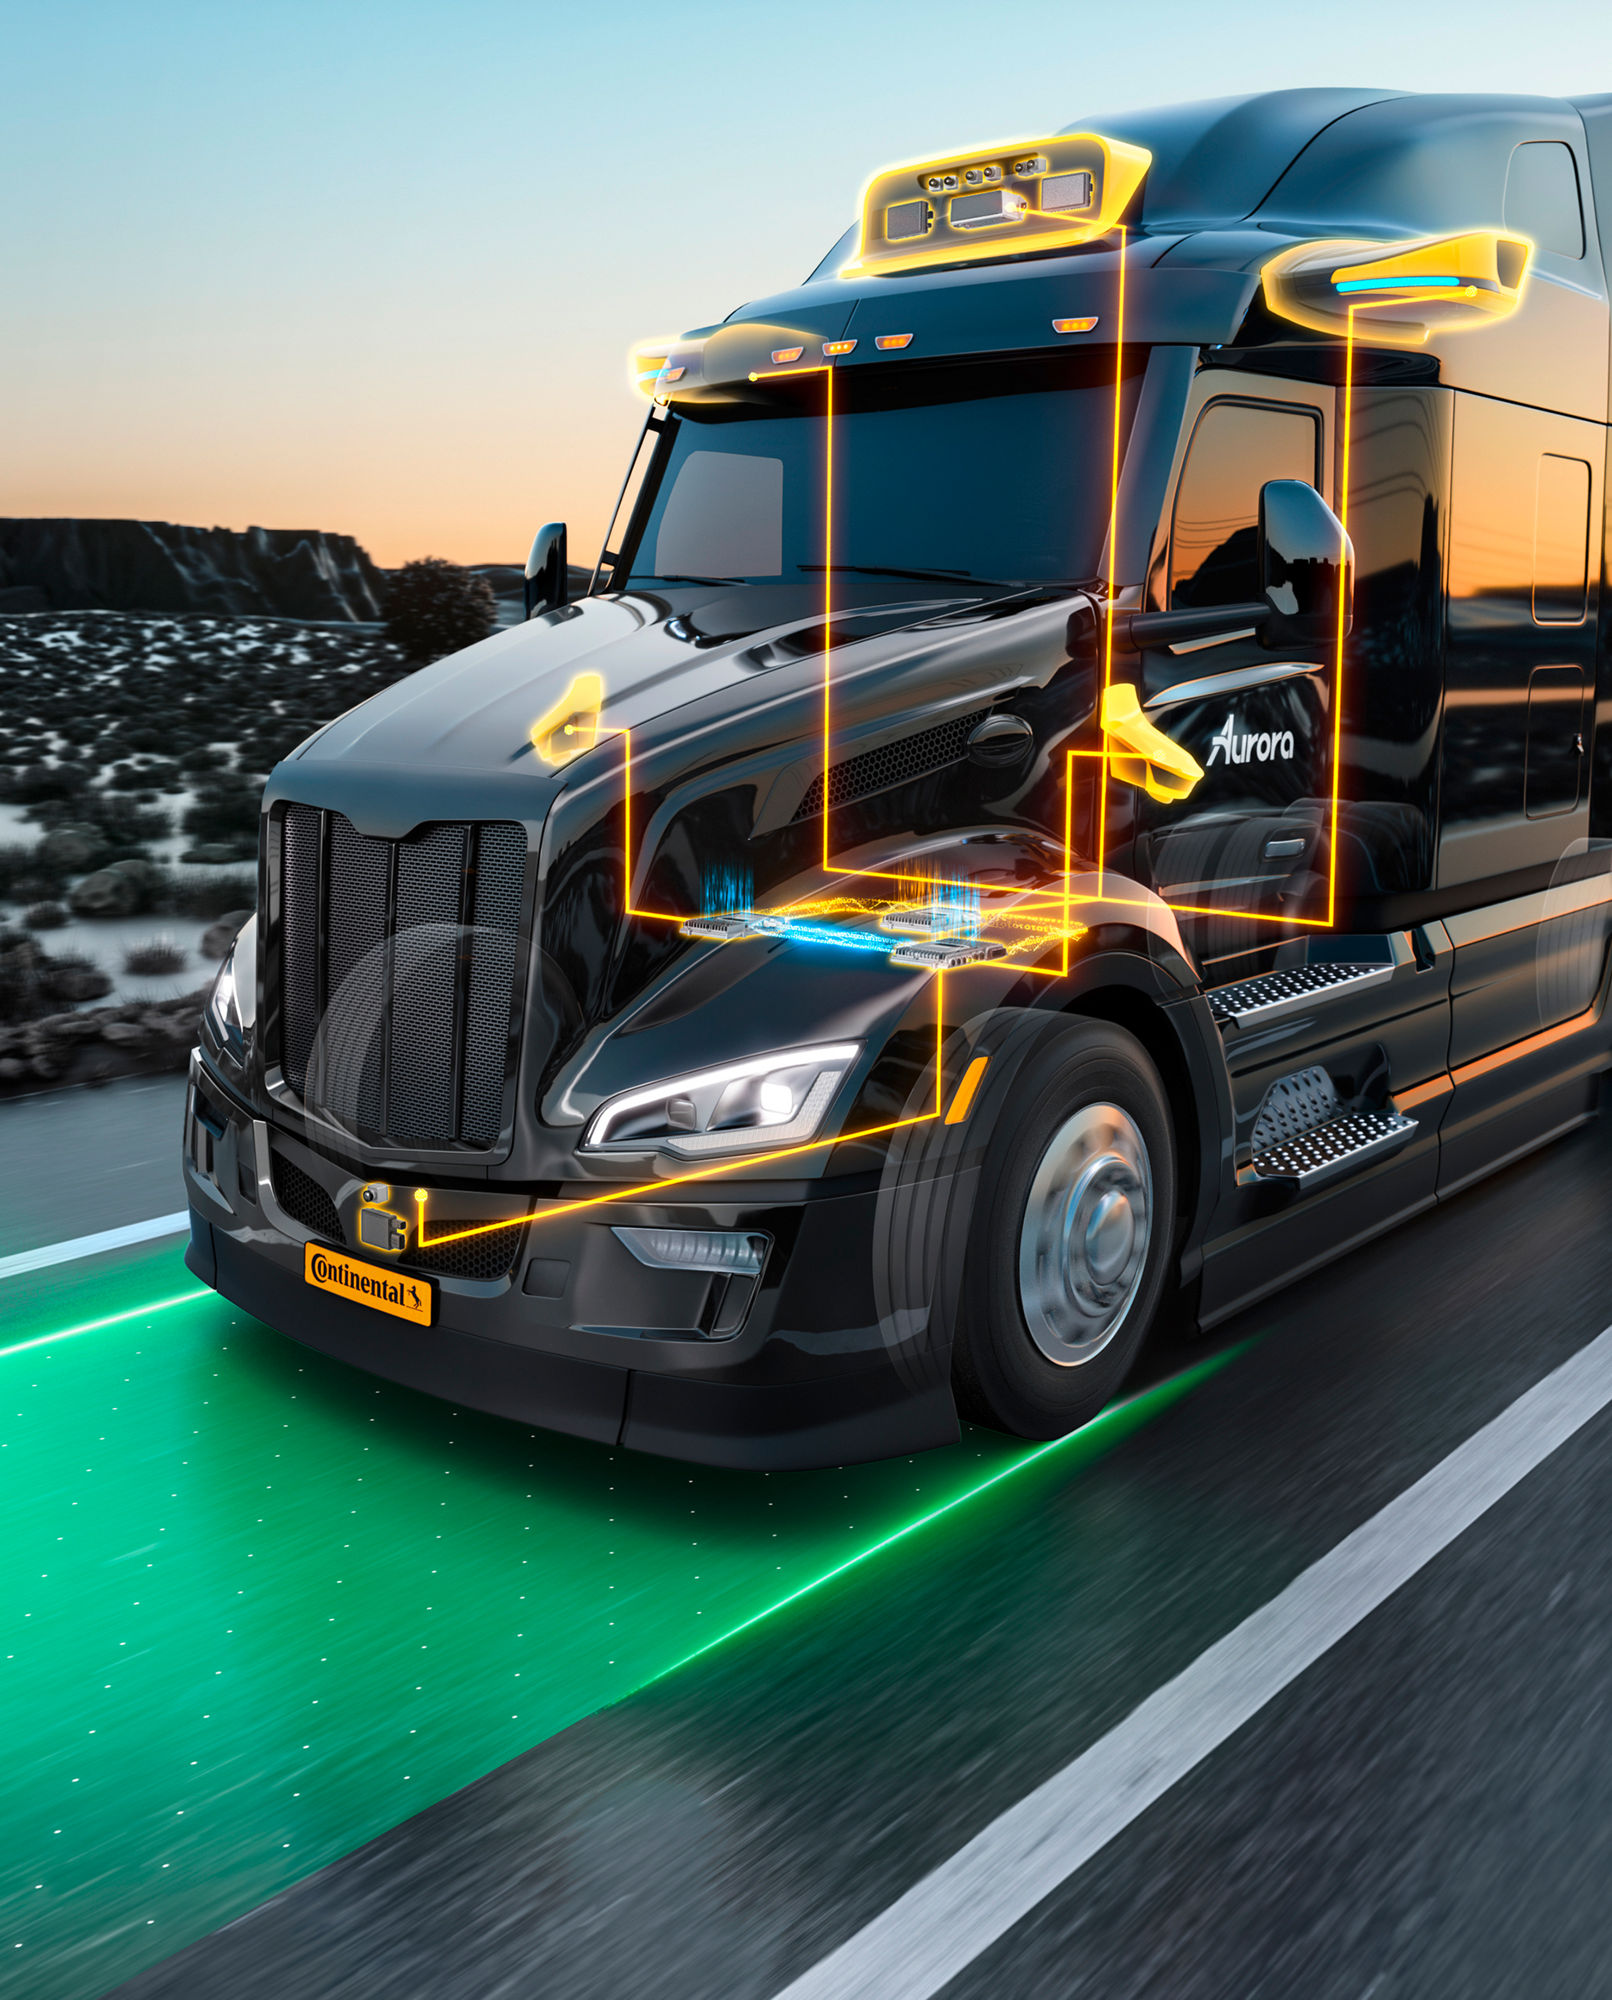 Implementing Holistic Approach To Address the Truck Driver Shortage